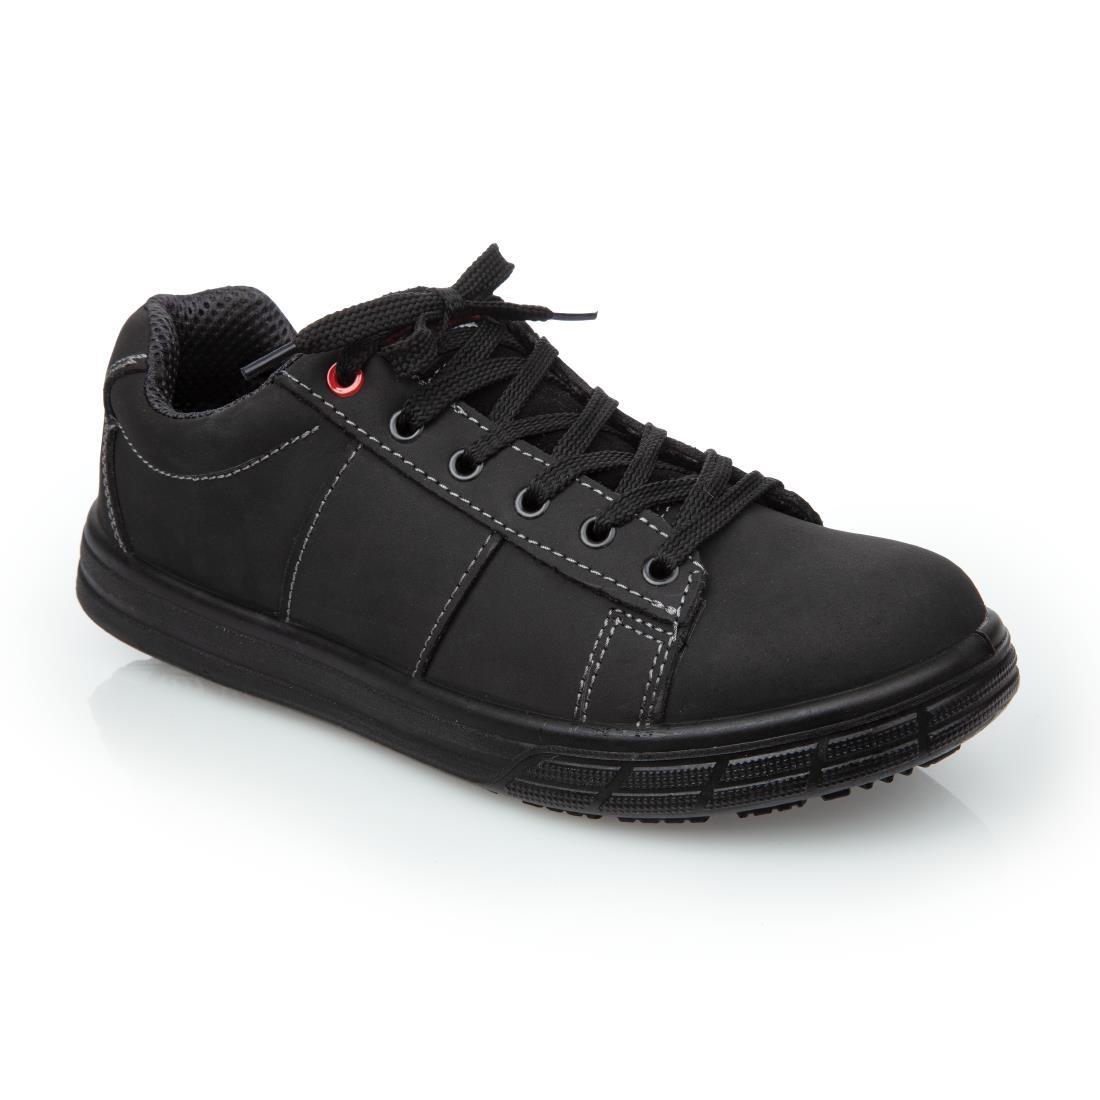 Slipbuster Safety Trainers Black 40 - BB420-40  - 1